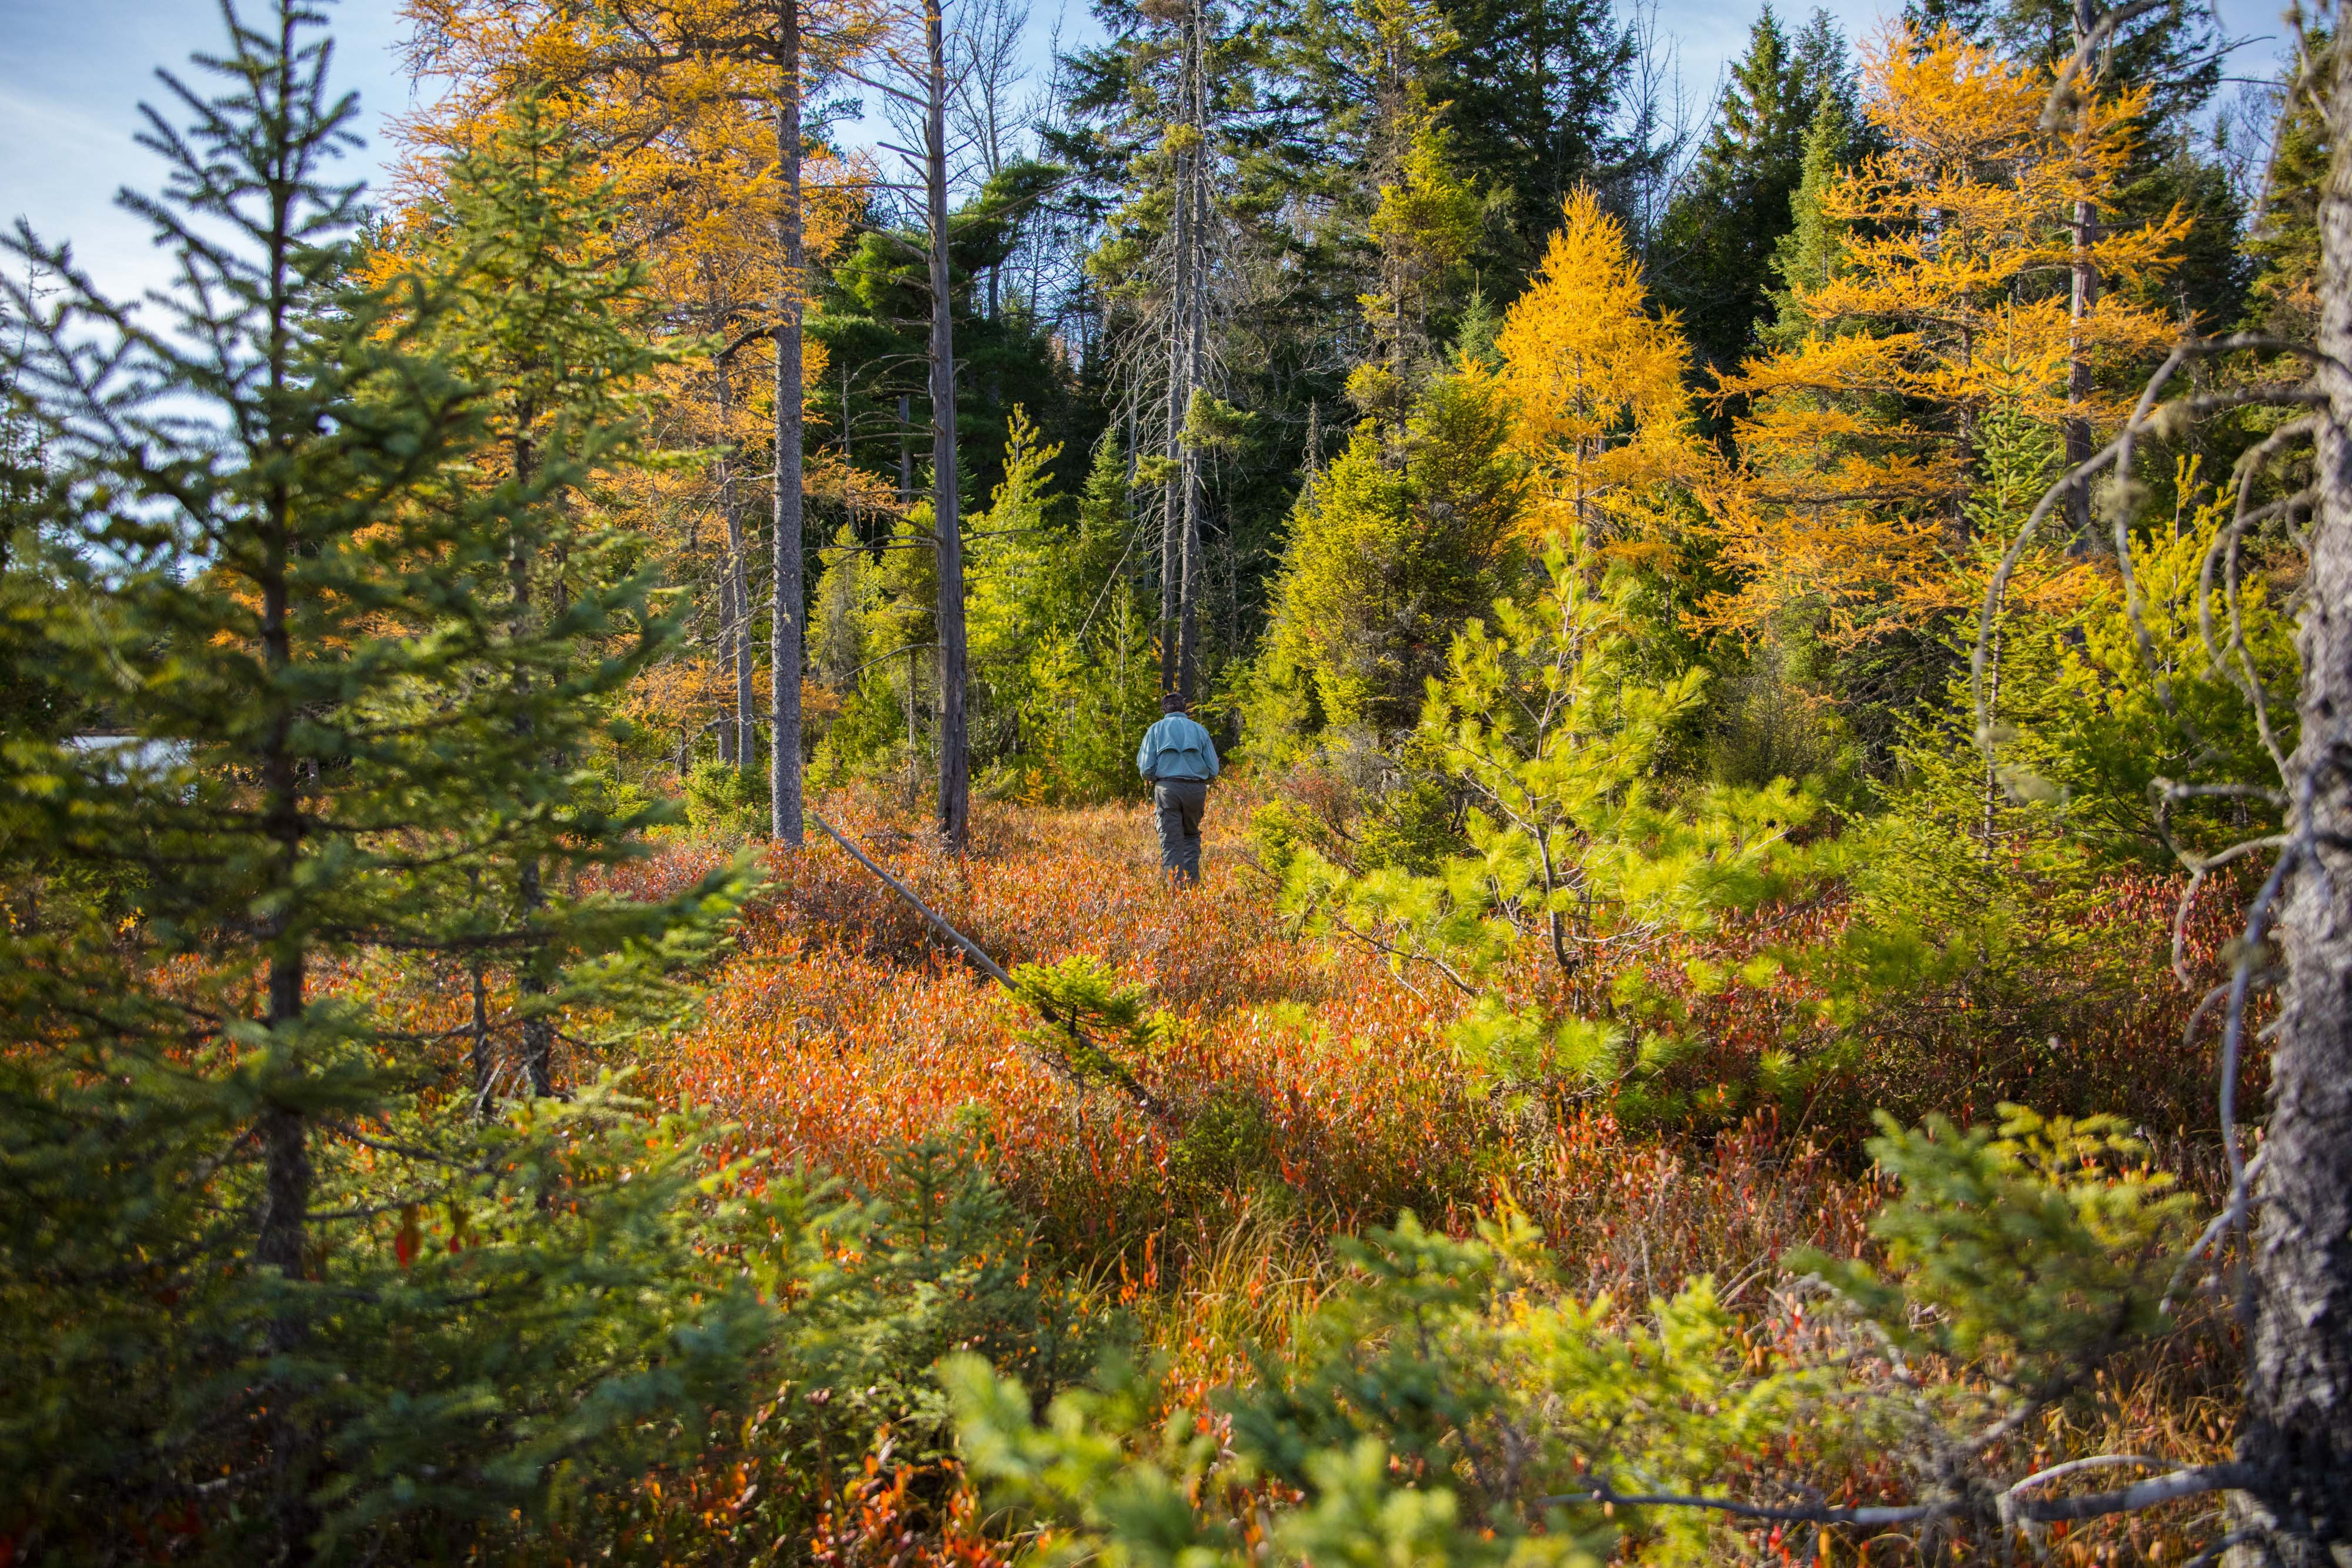 A man walking through a forest with the leaves changing colors.